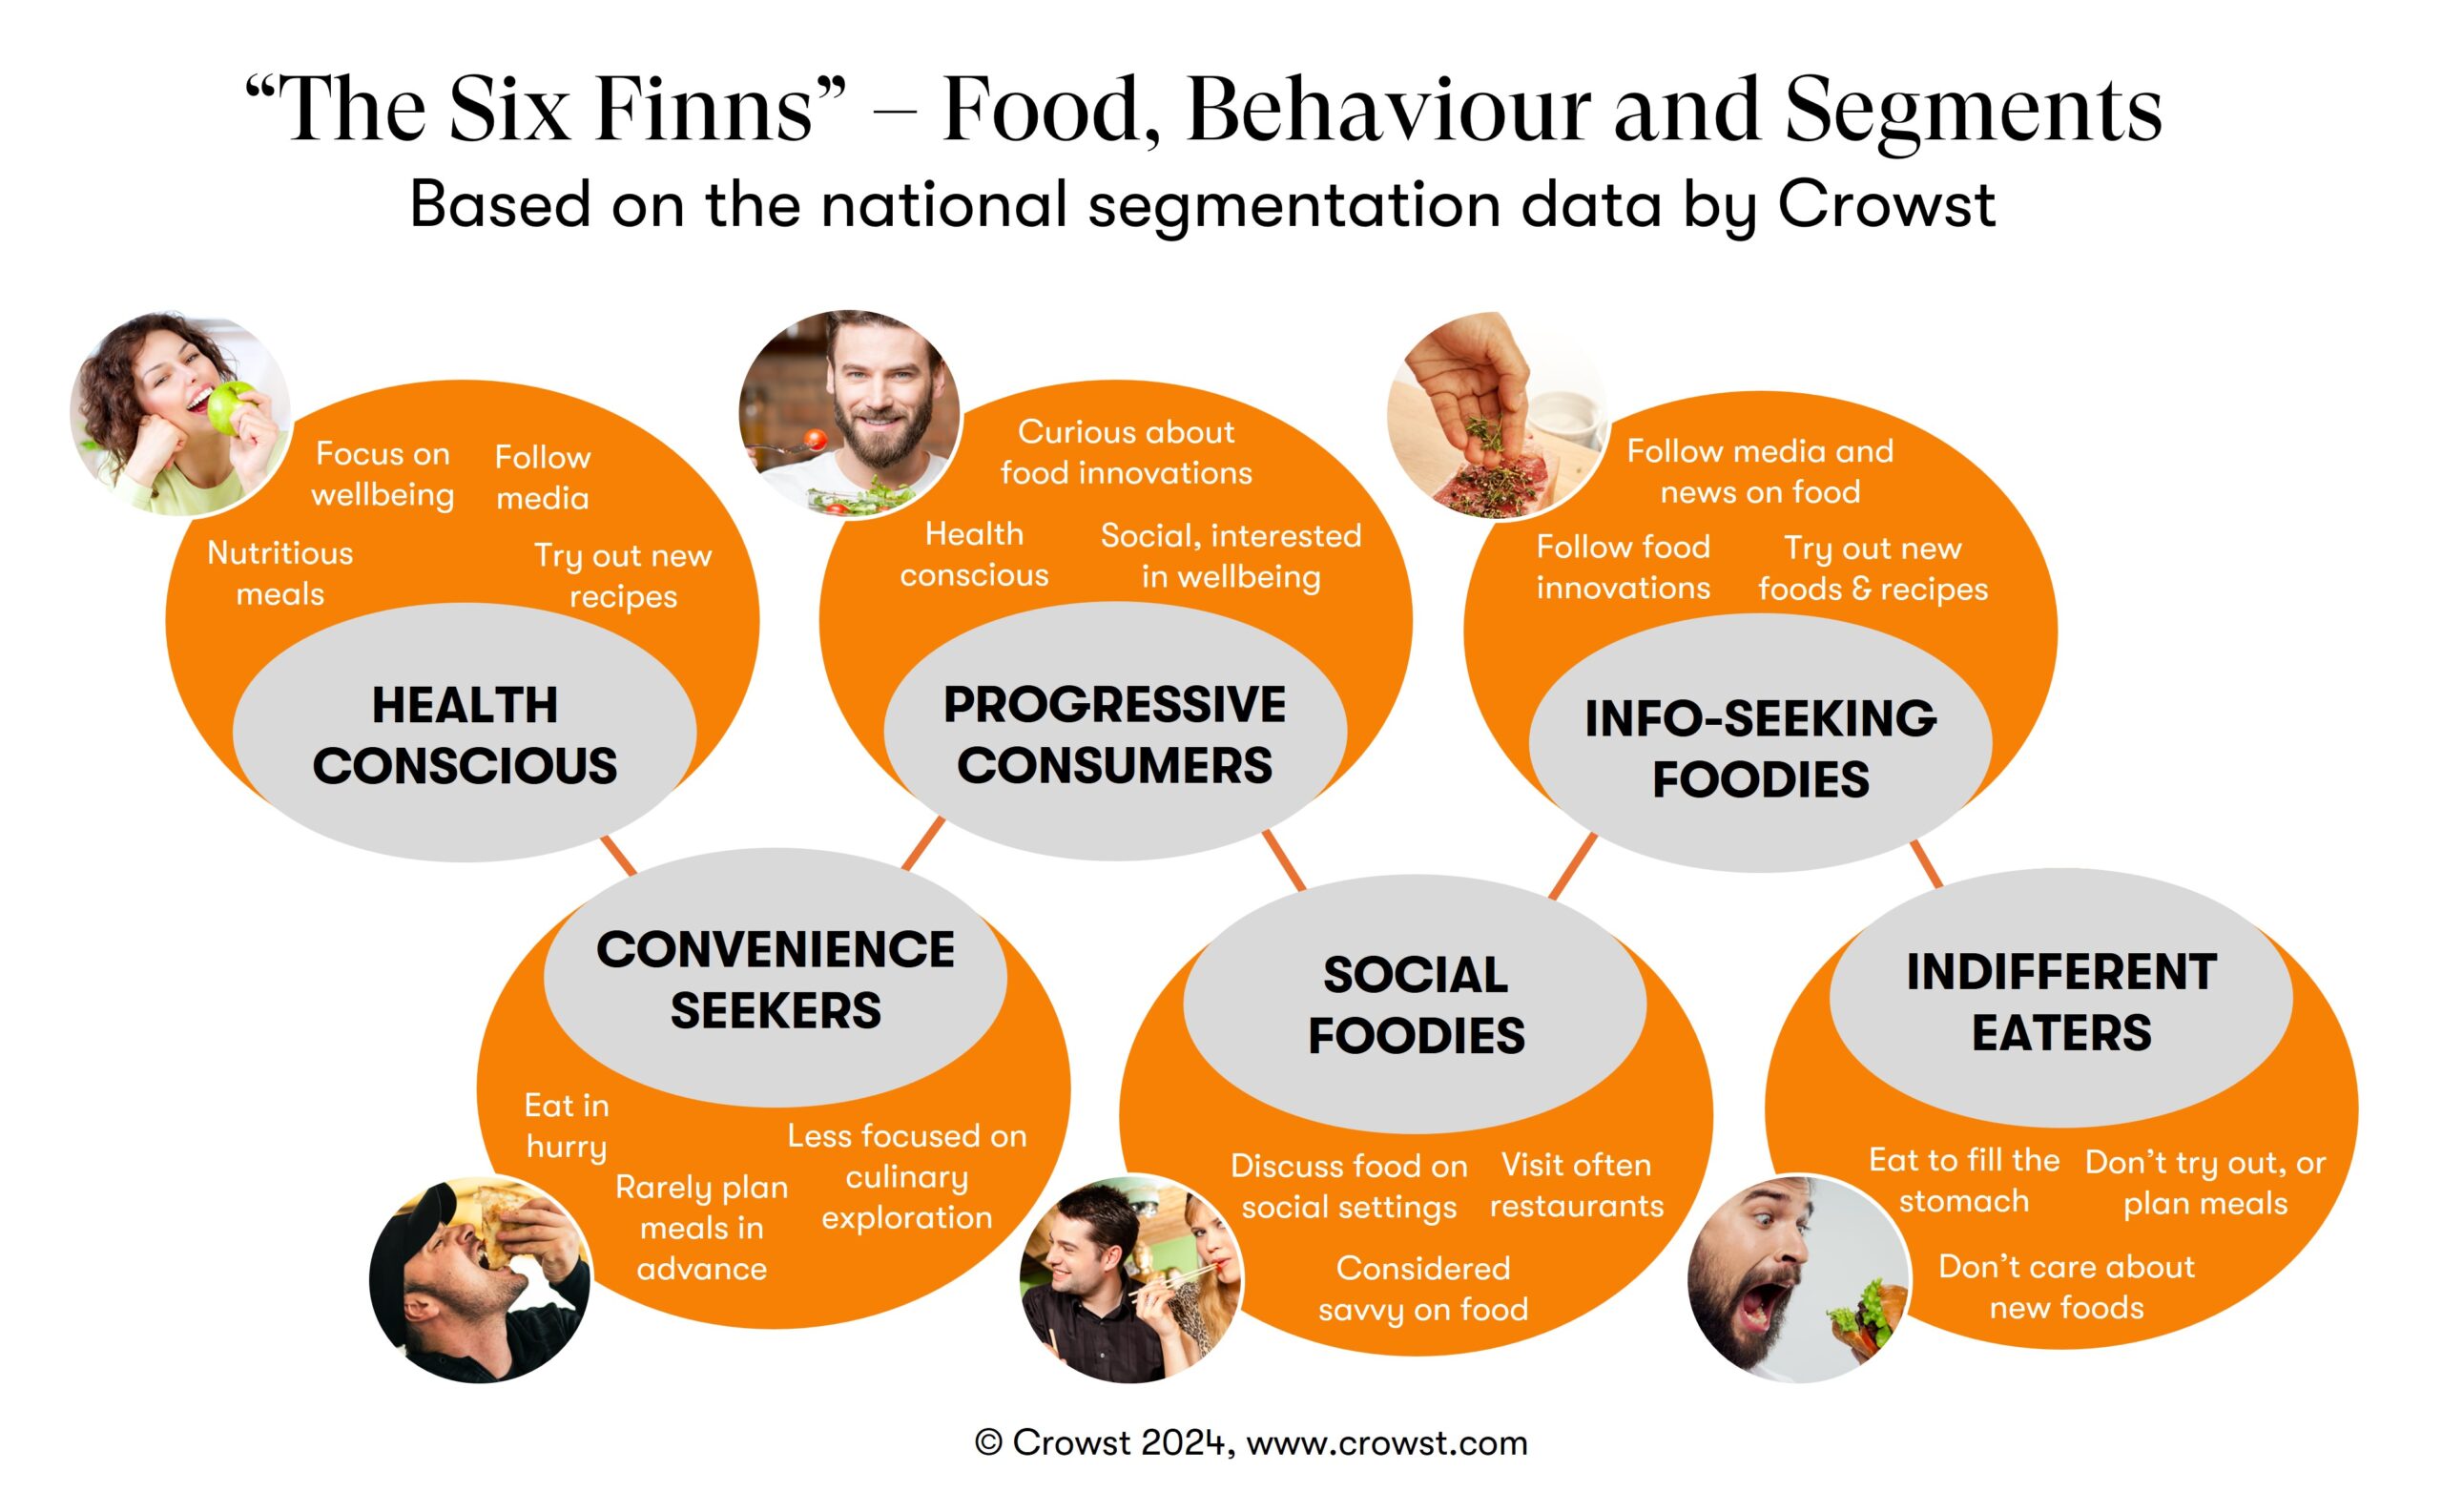 "The Six Finns" - Introducing the consumer segments on food consumption in Finland (Crowst).